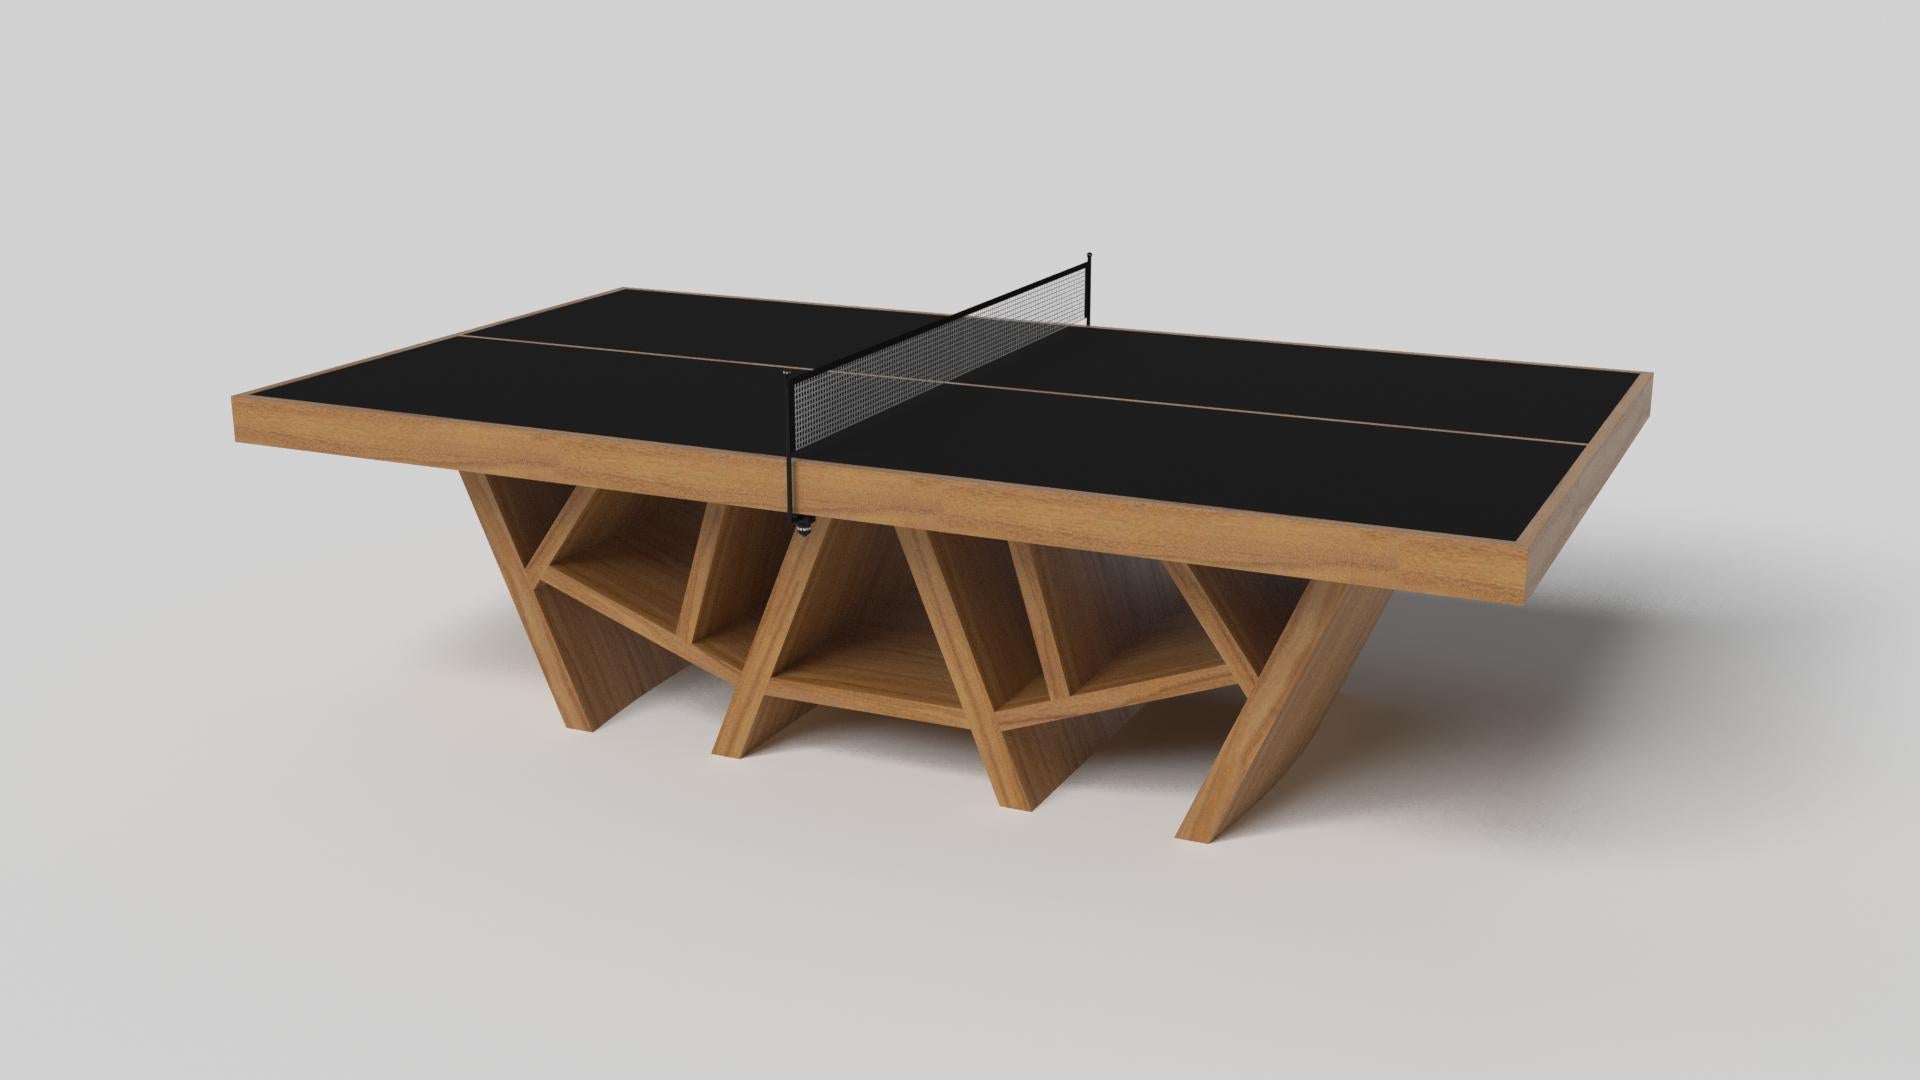 With a combination of acute angles, smooth lines, and geometric configurations, the Maze table tennis table in walnut is characterized by a labyrinth-inspired base with a mystifying motif. Beautifully detailed with a smooth black top for game play,